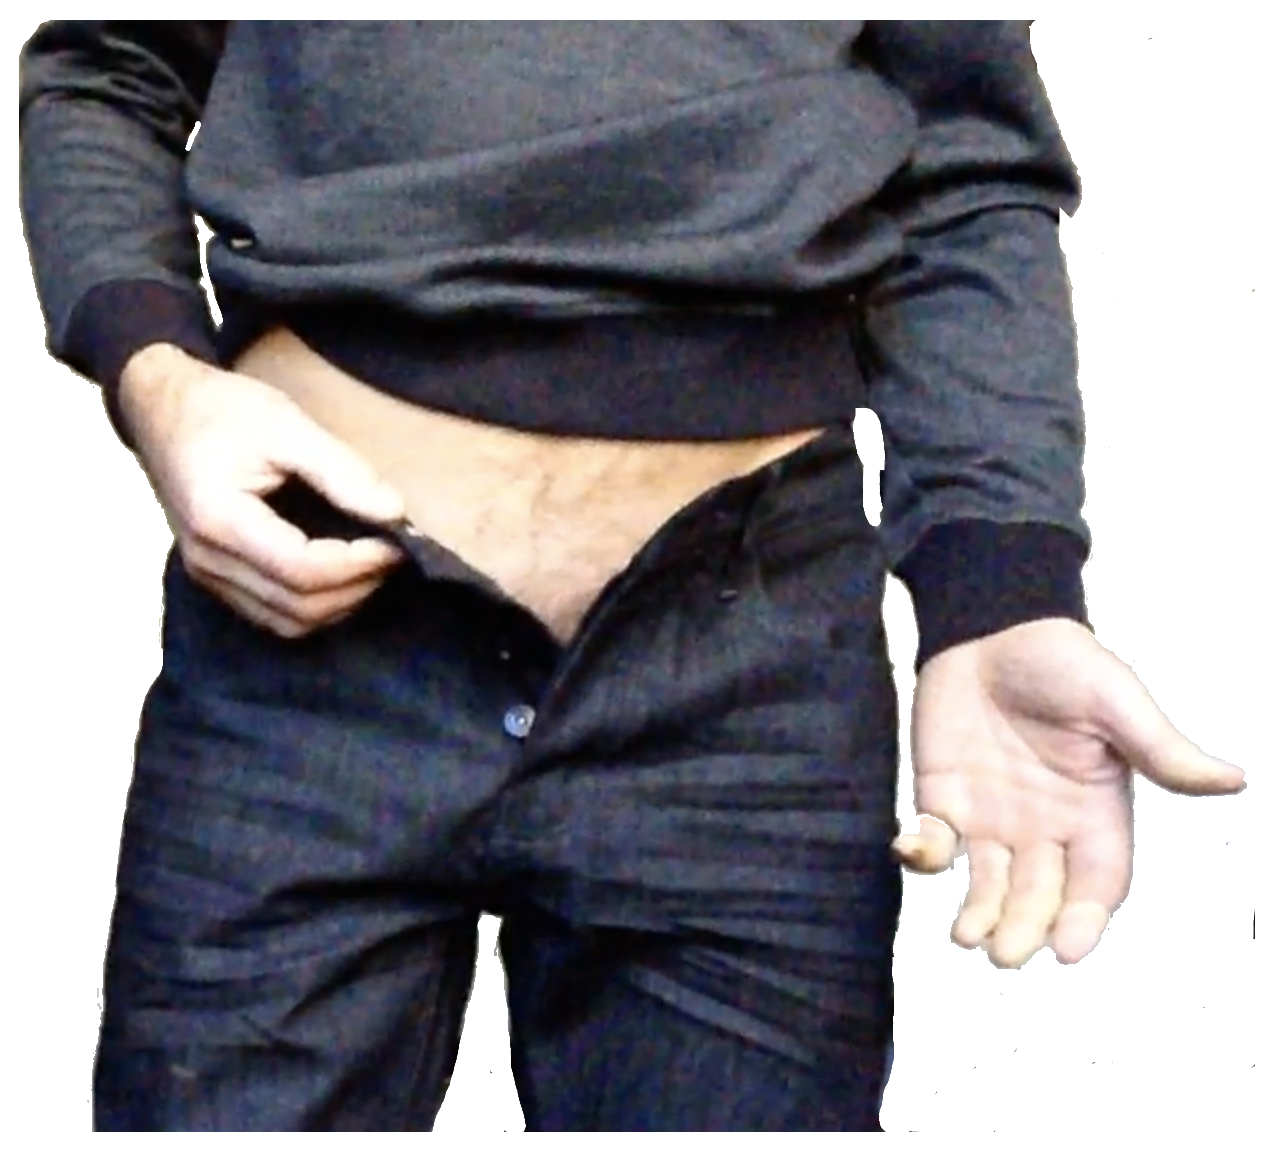 man unbuttoned jeans gesturing with hand